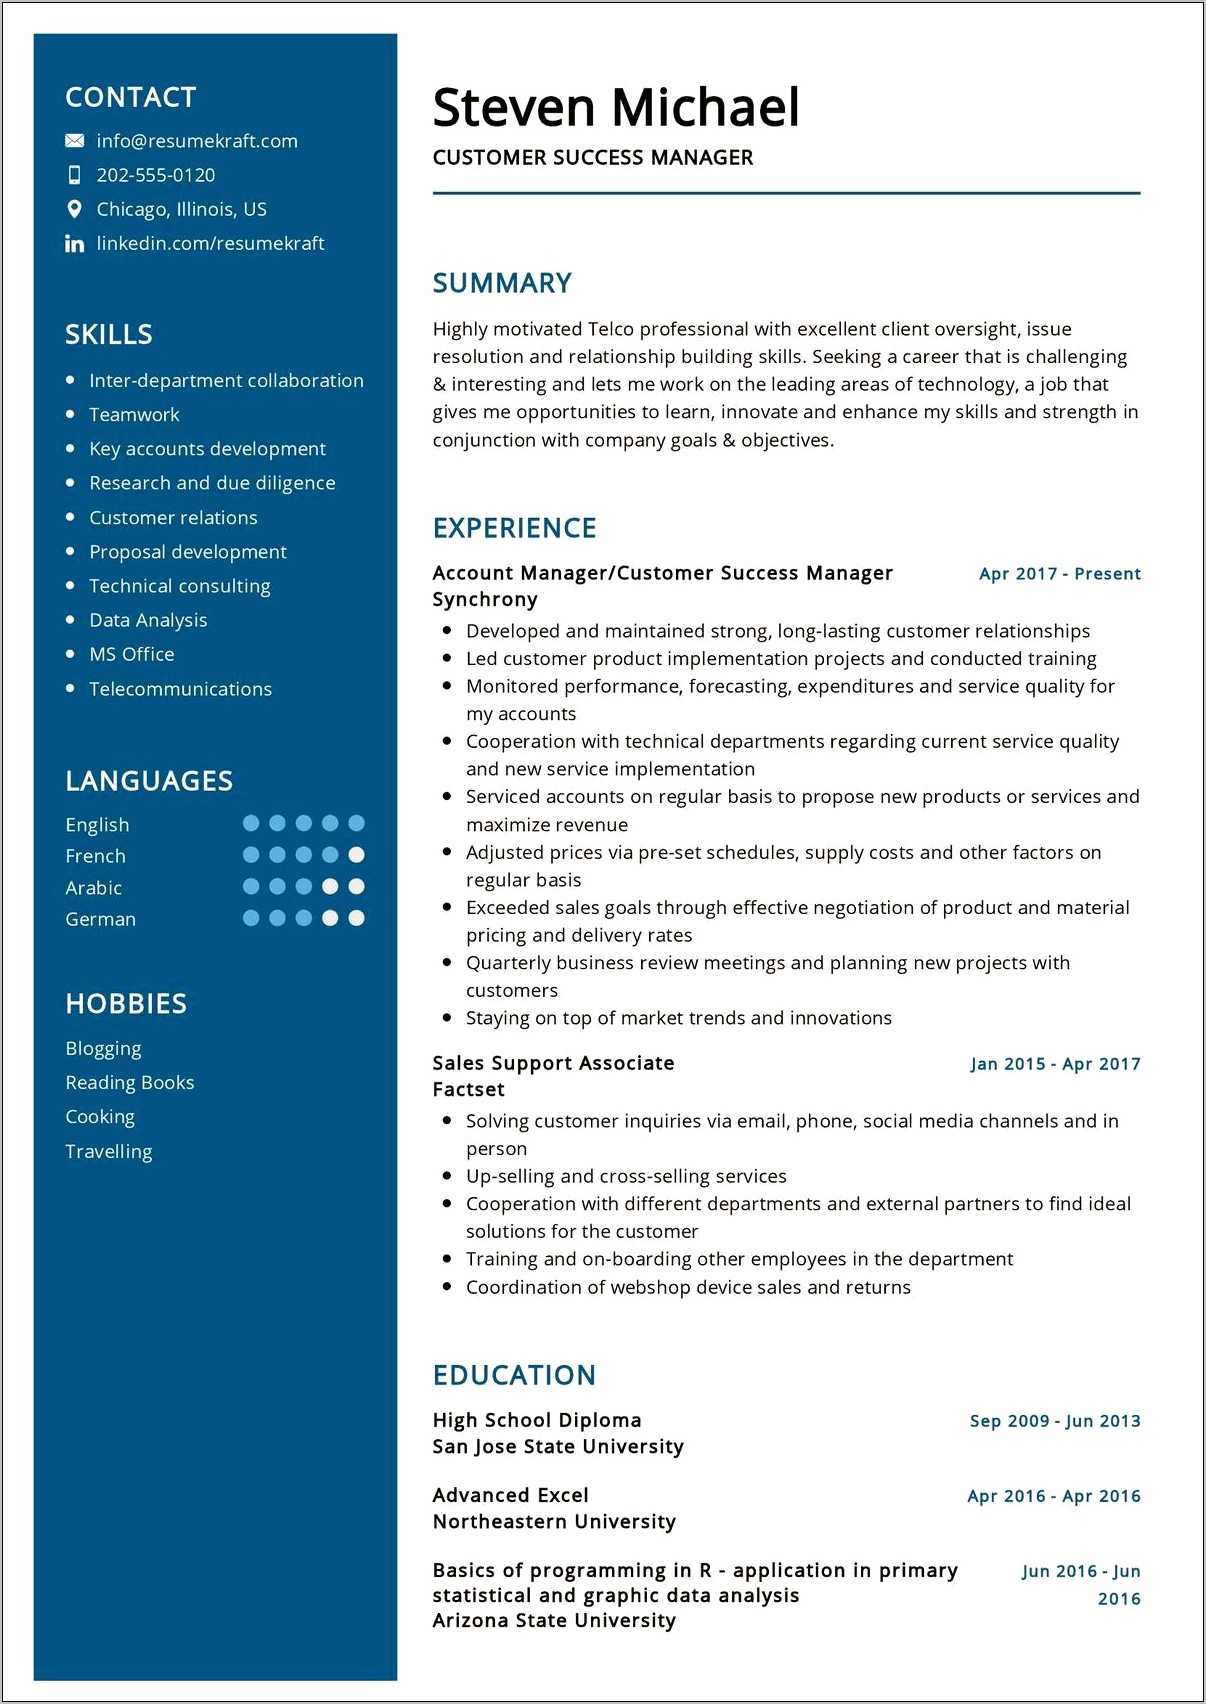 Sample Summary For Client Relations Manager Resume - Resume Example Gallery